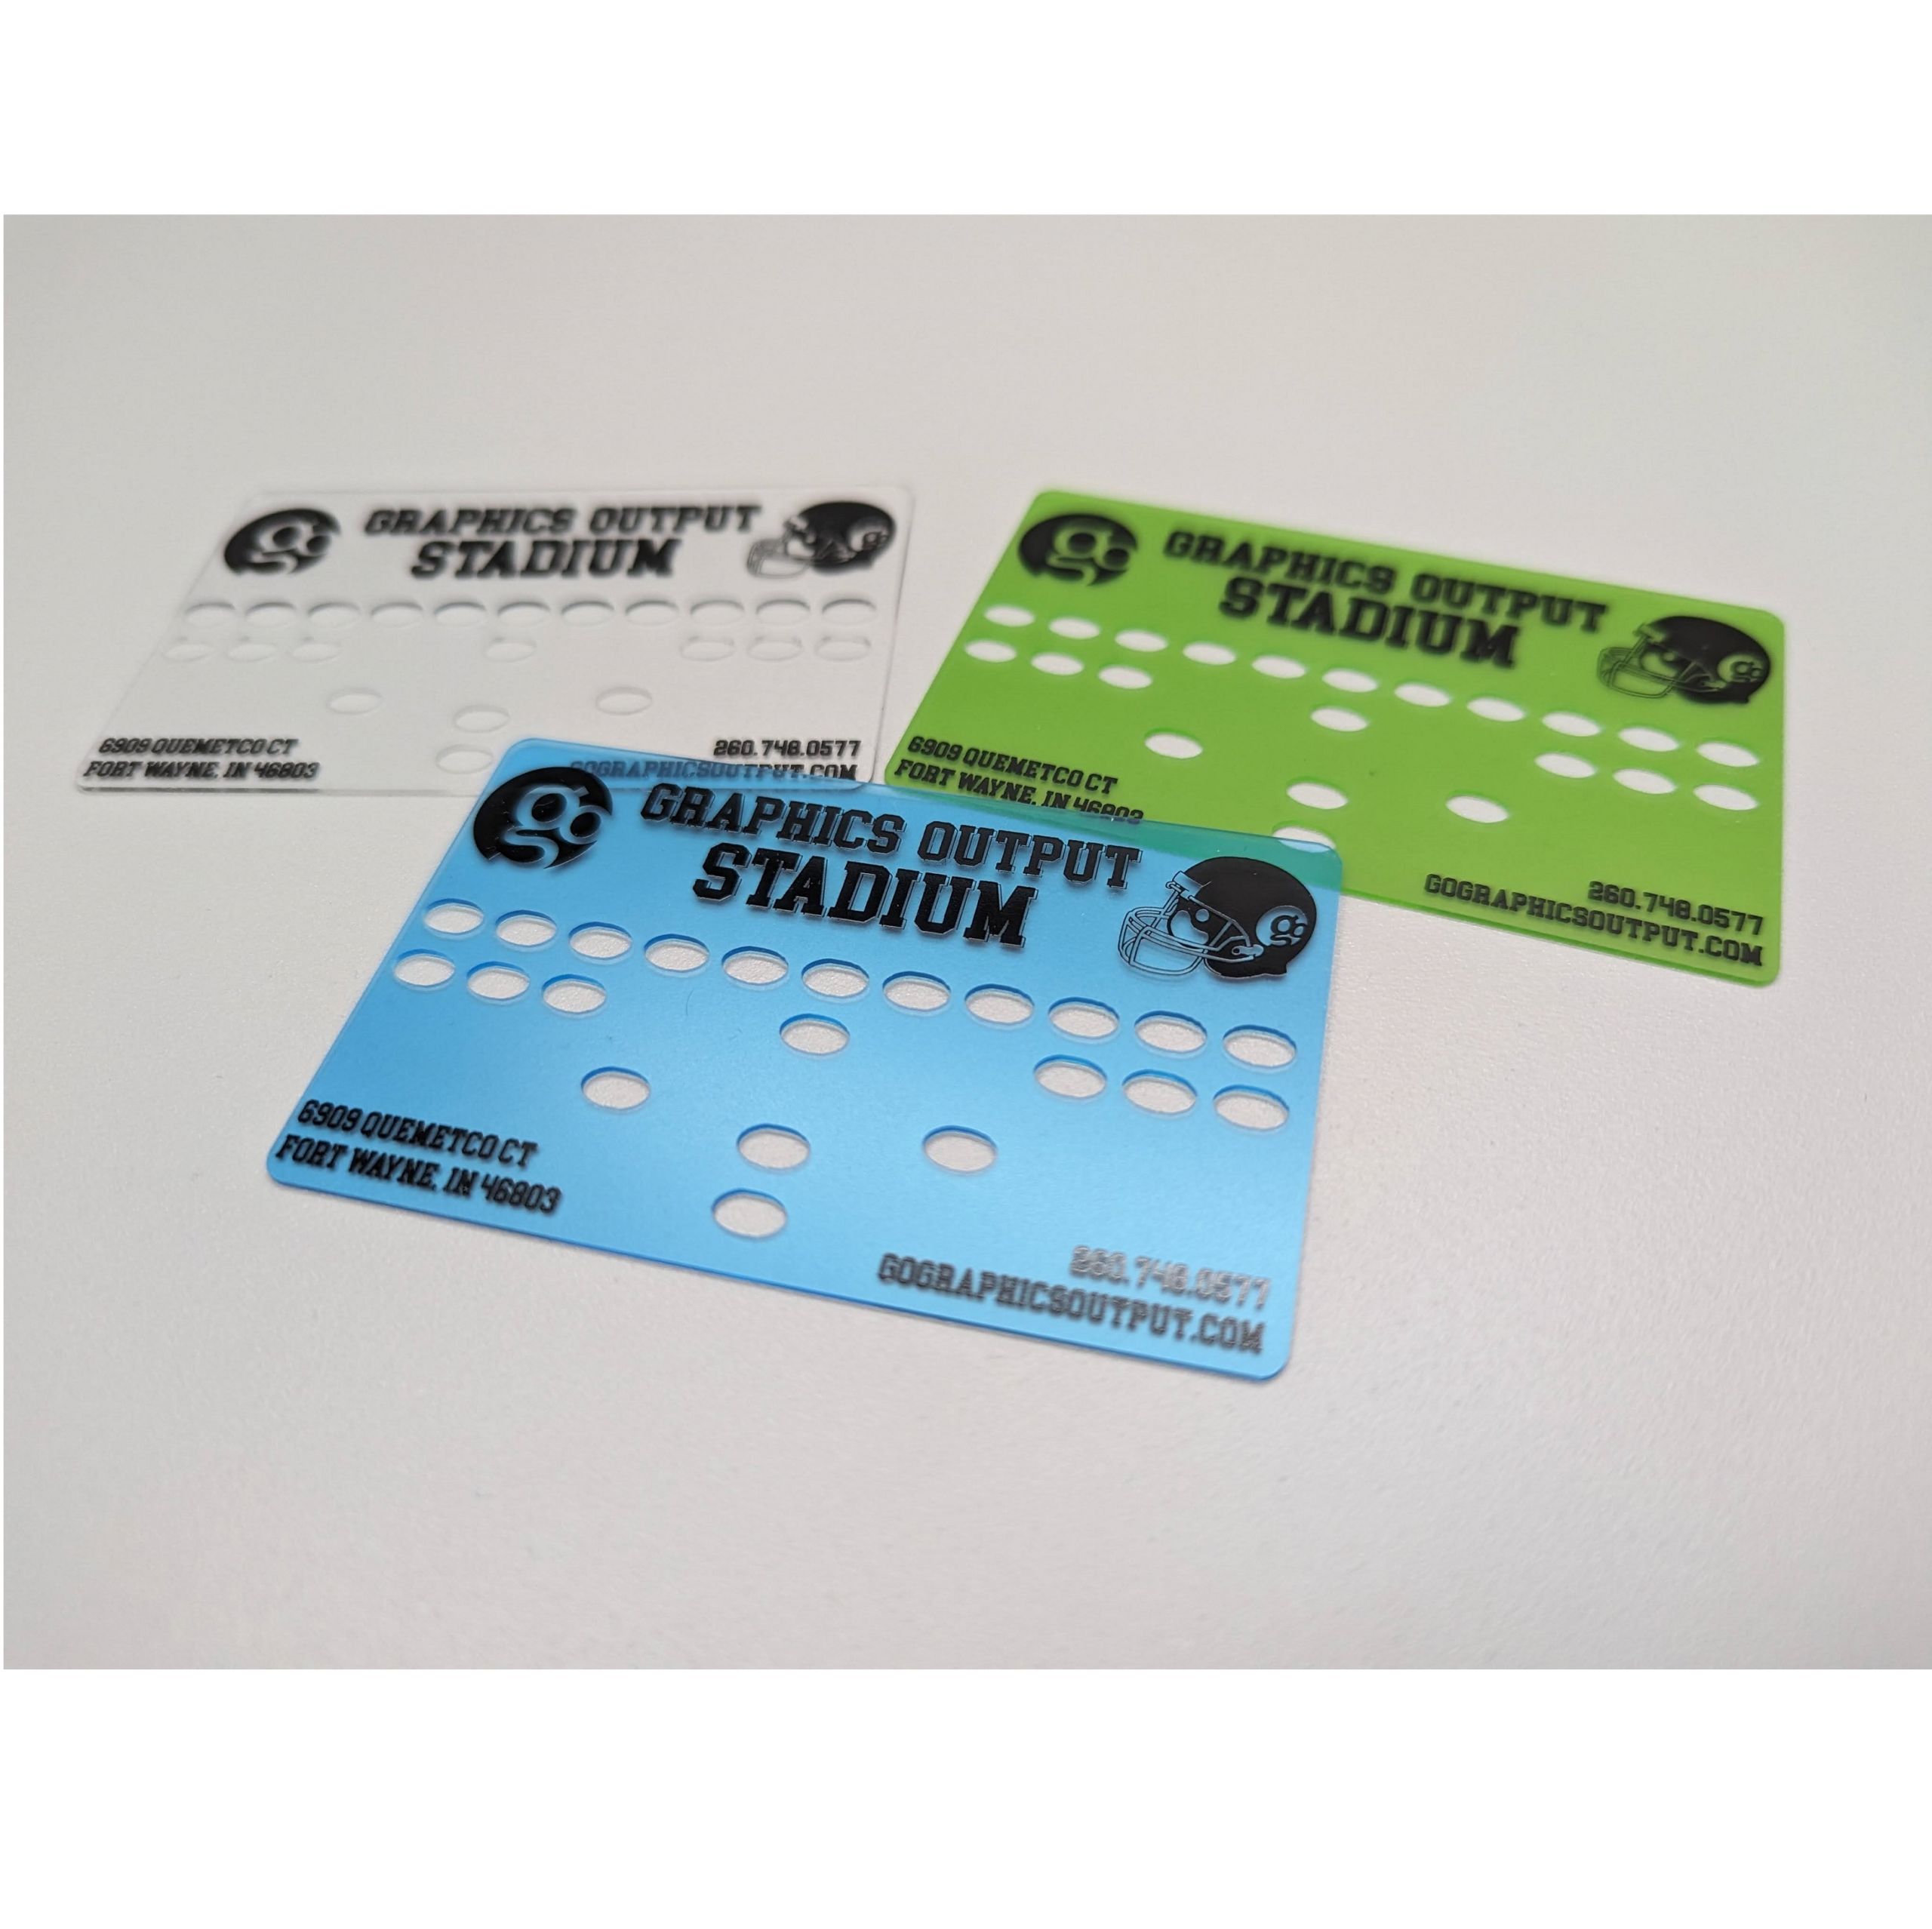 Stencil-style Business Card with cutouts for football playwriting